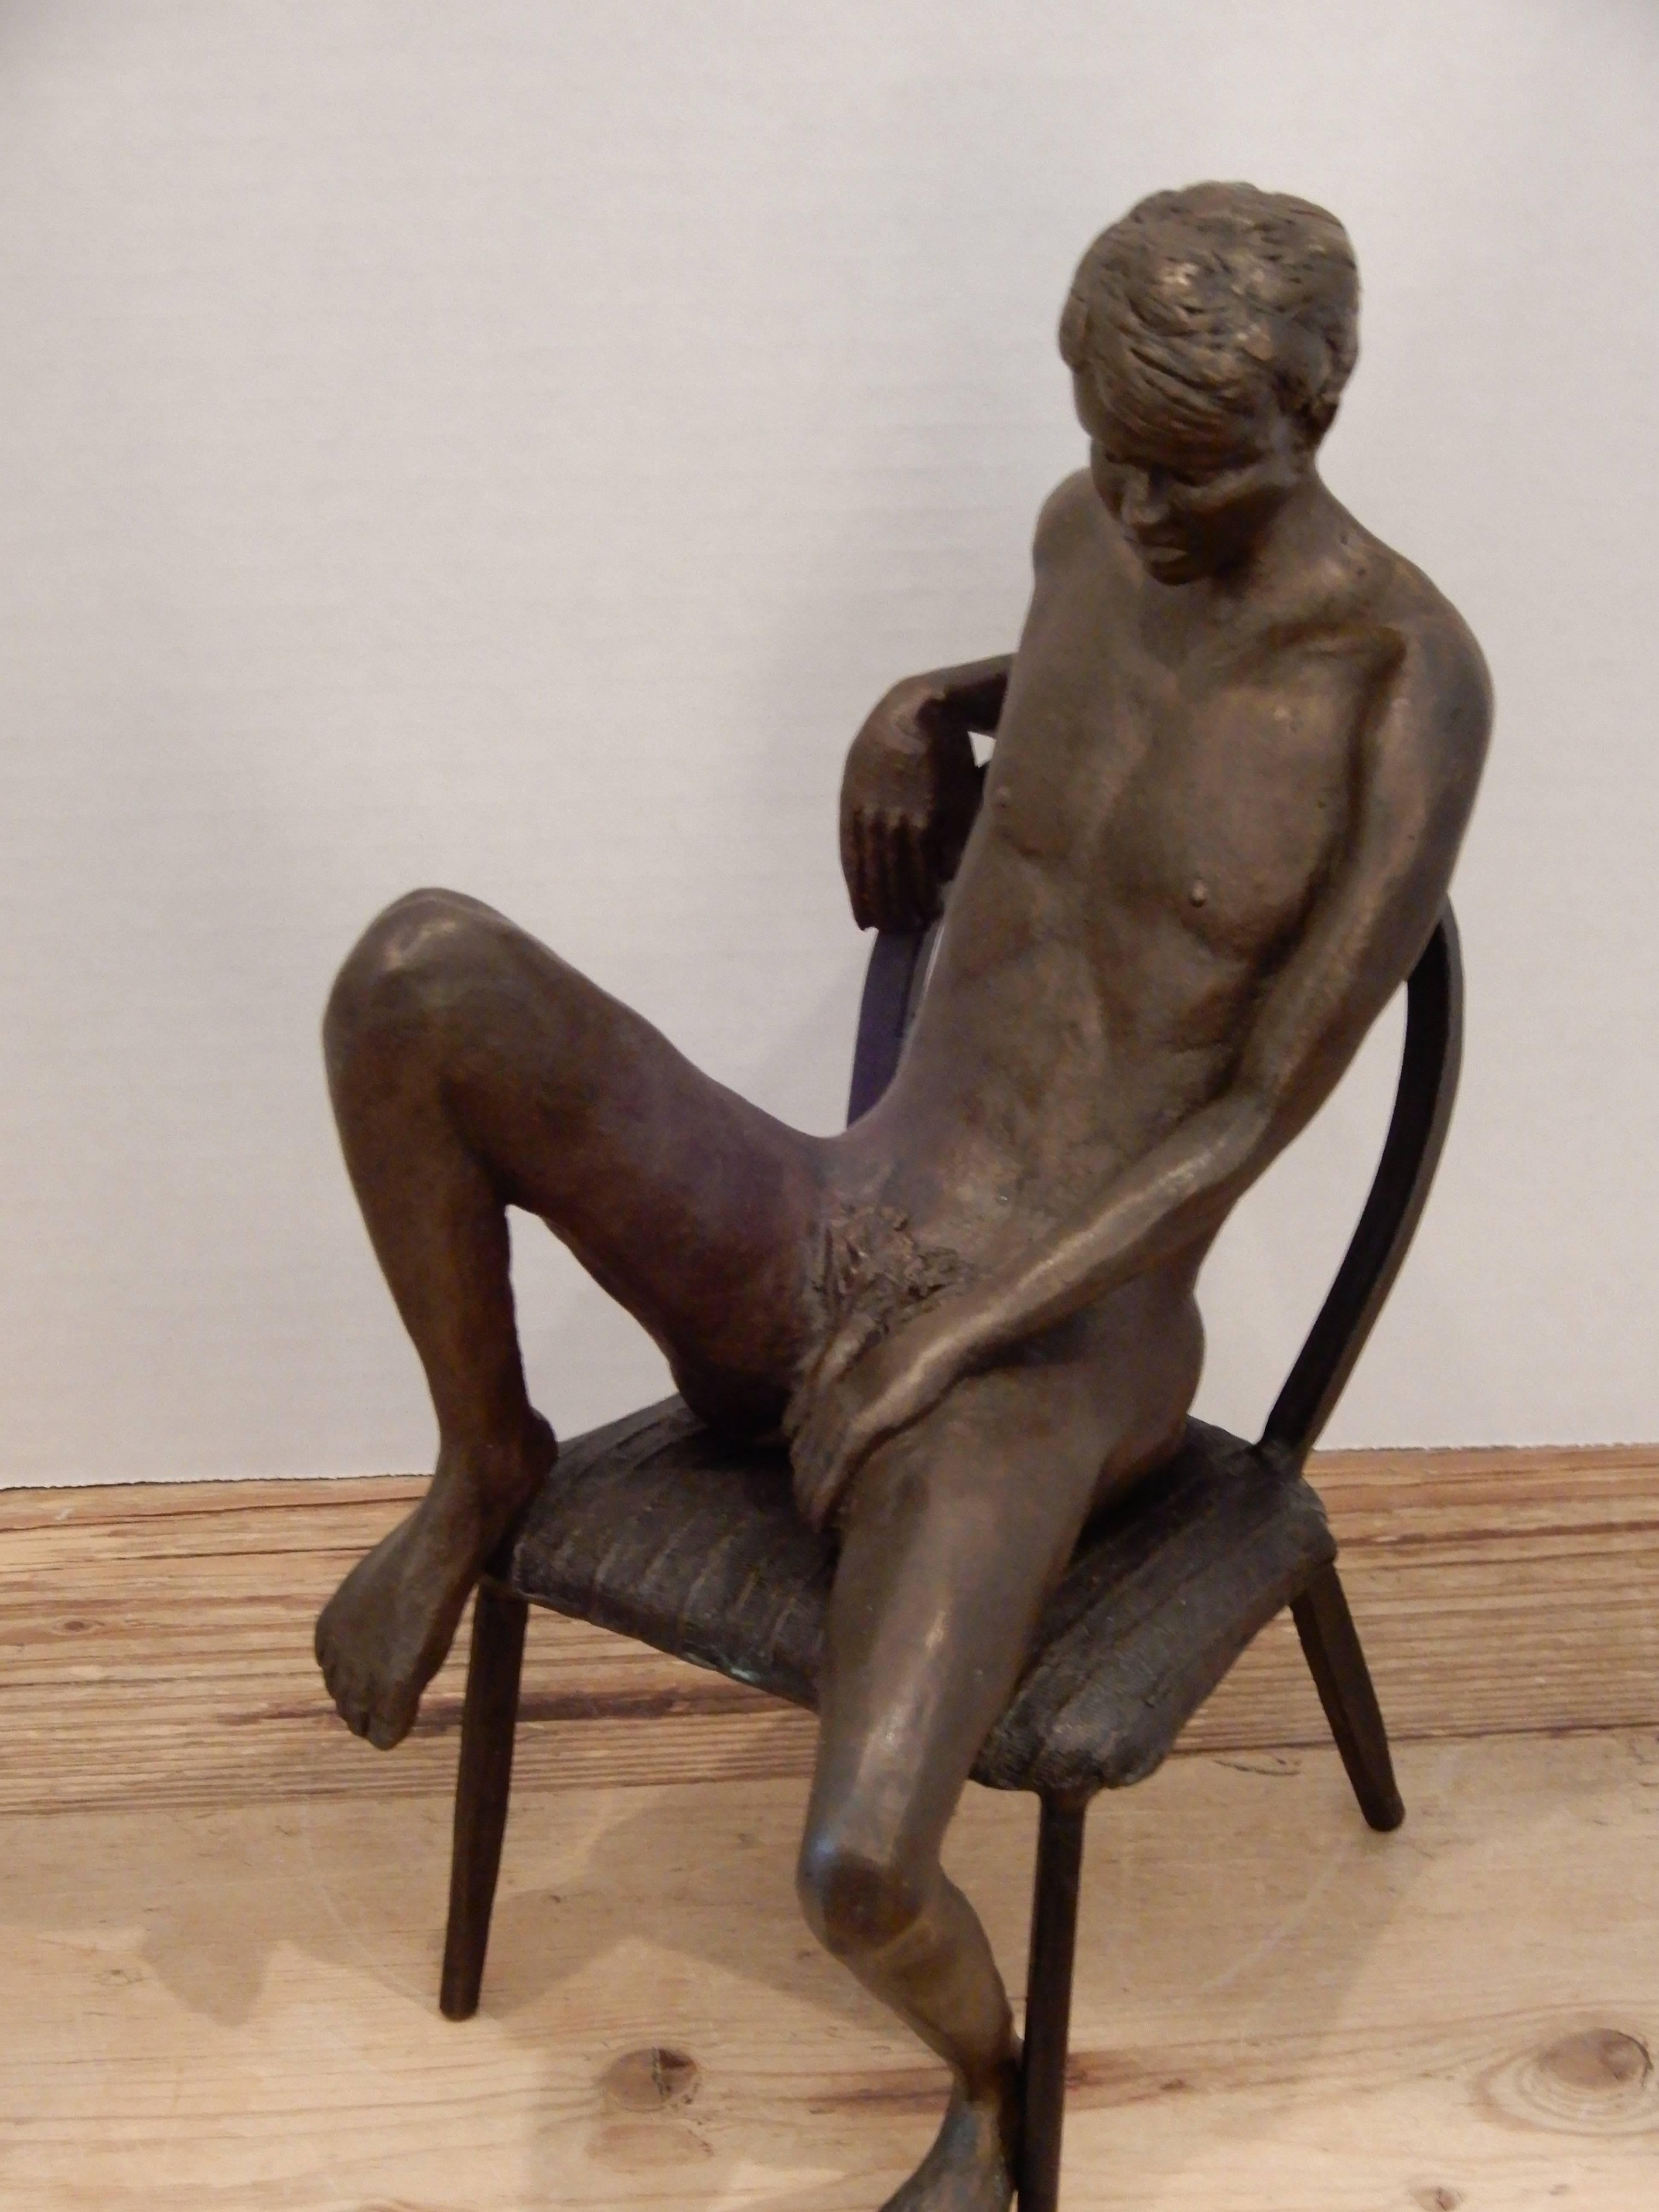 Hand-Crafted Male Bronze Nude by Artist Gerard Franc circa 1999